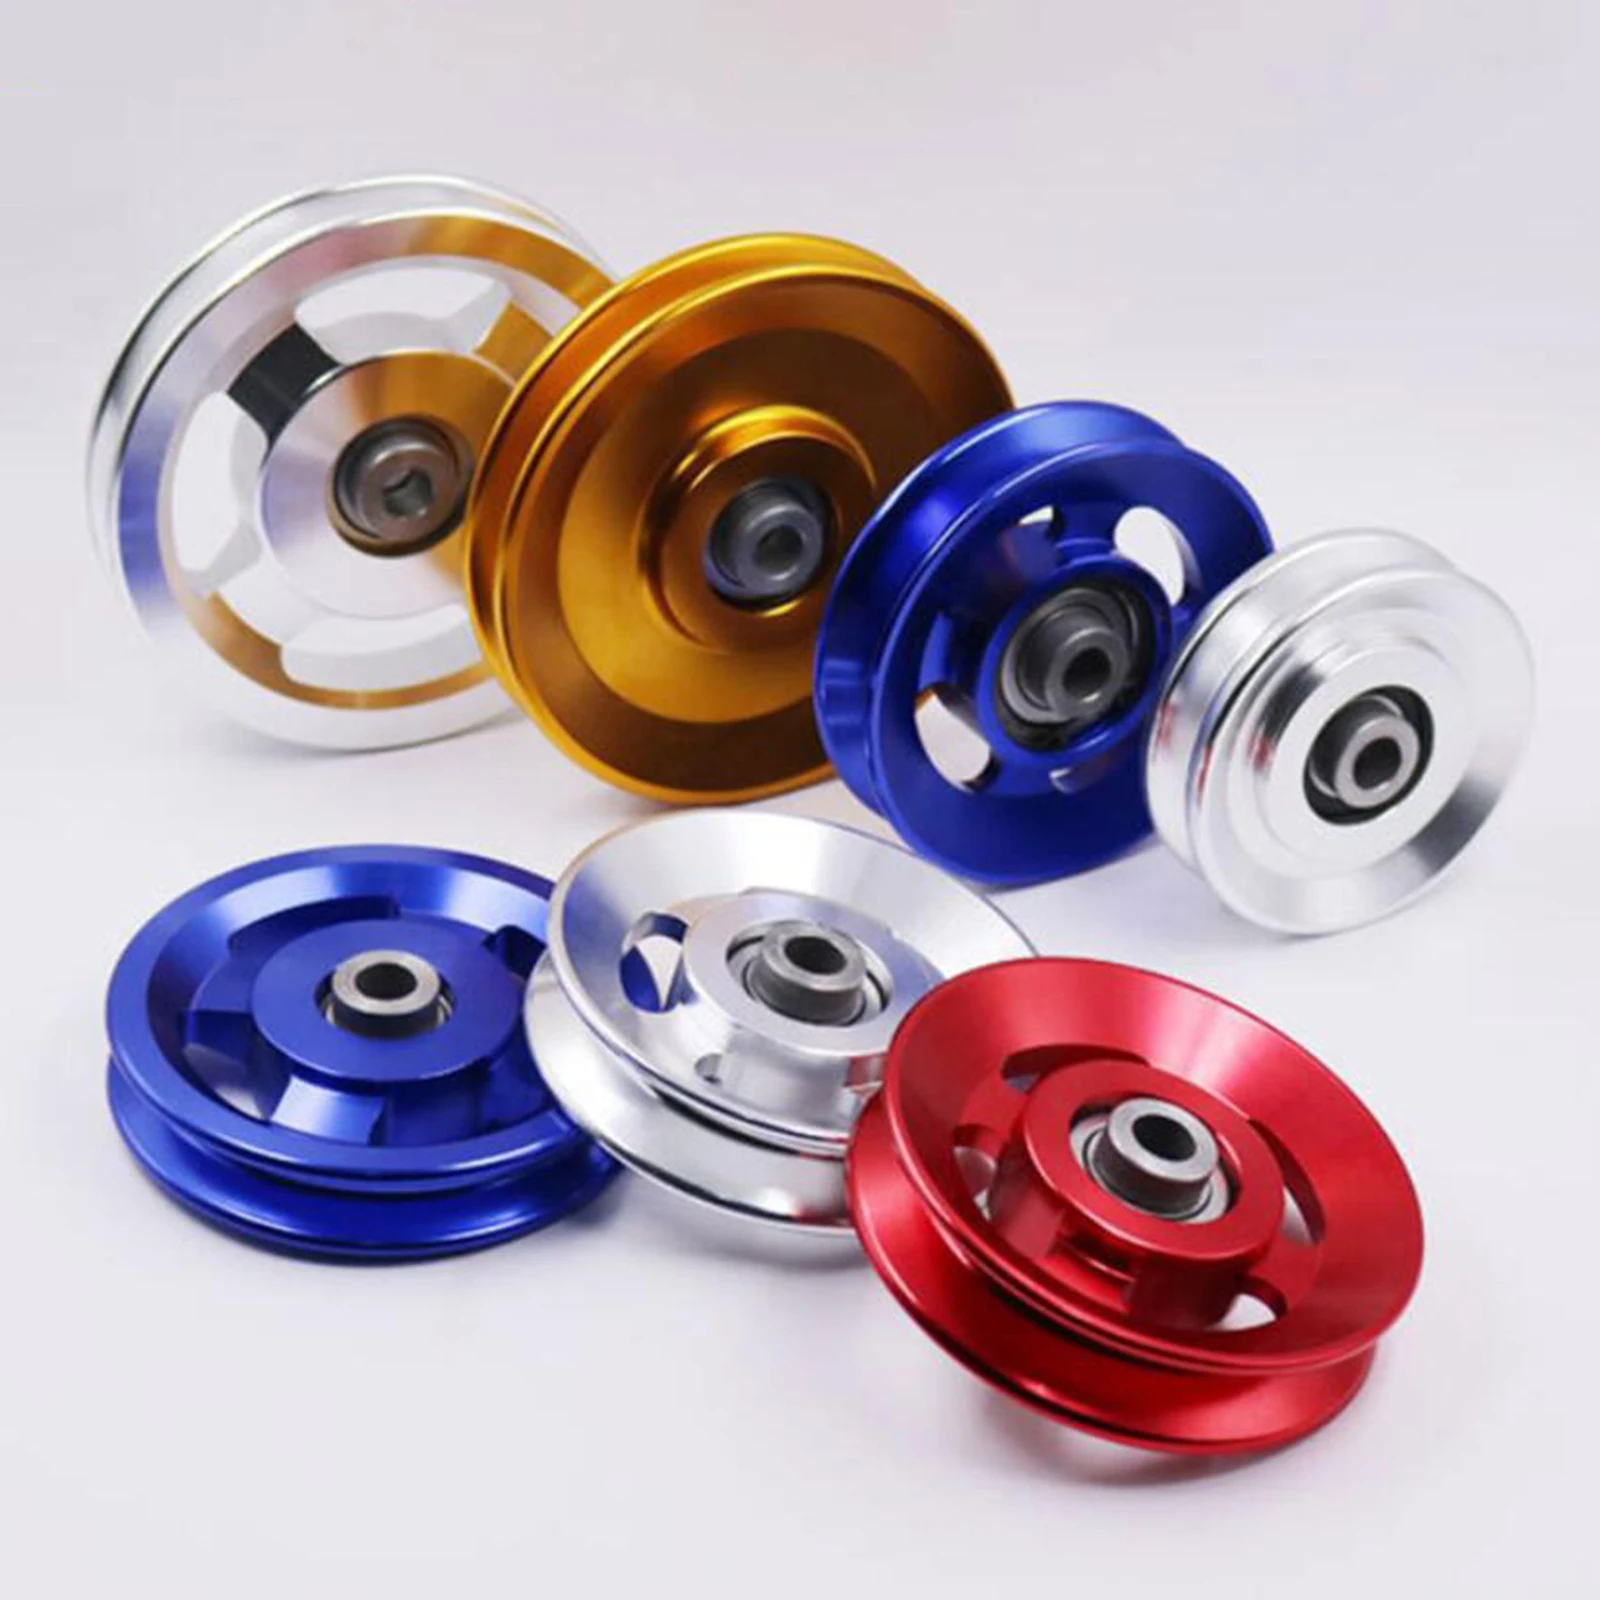 Universal Aluminium Alloy Bearing Pulley Wheel Gym Accessory Diameter 90mm&115mm 2 Size for Fitness Equipment 